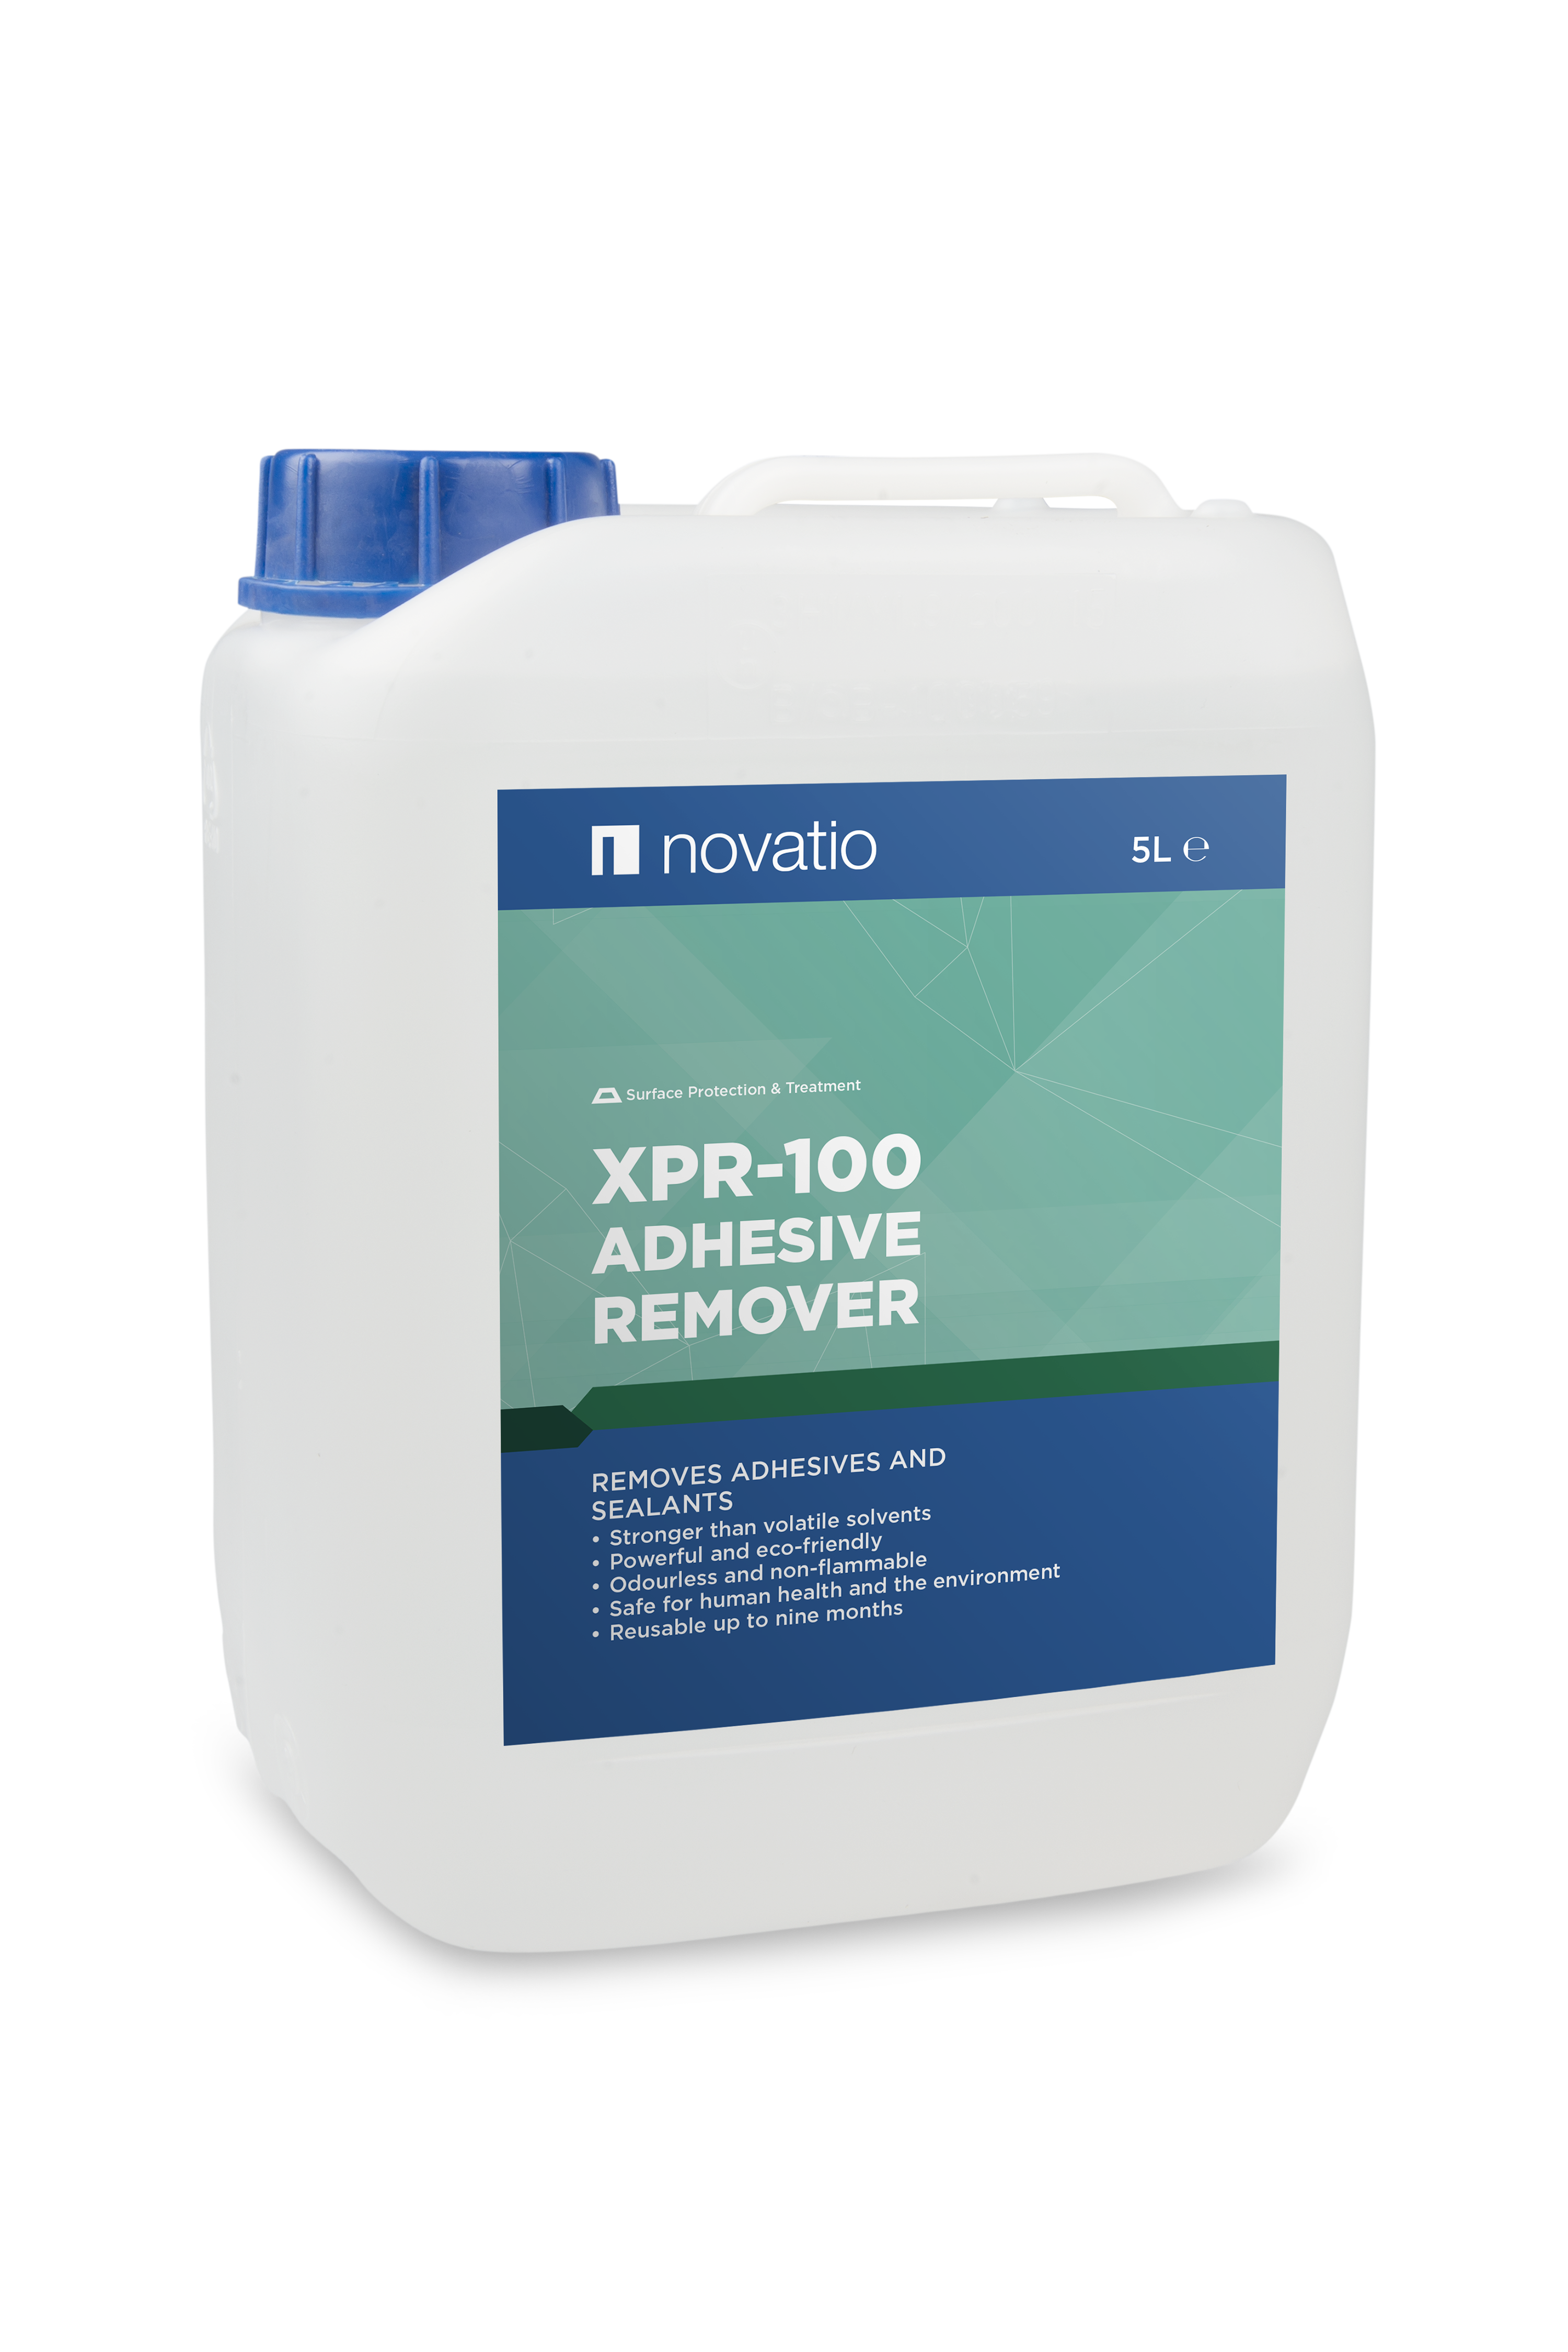 XPR-100 Adhesive Remover